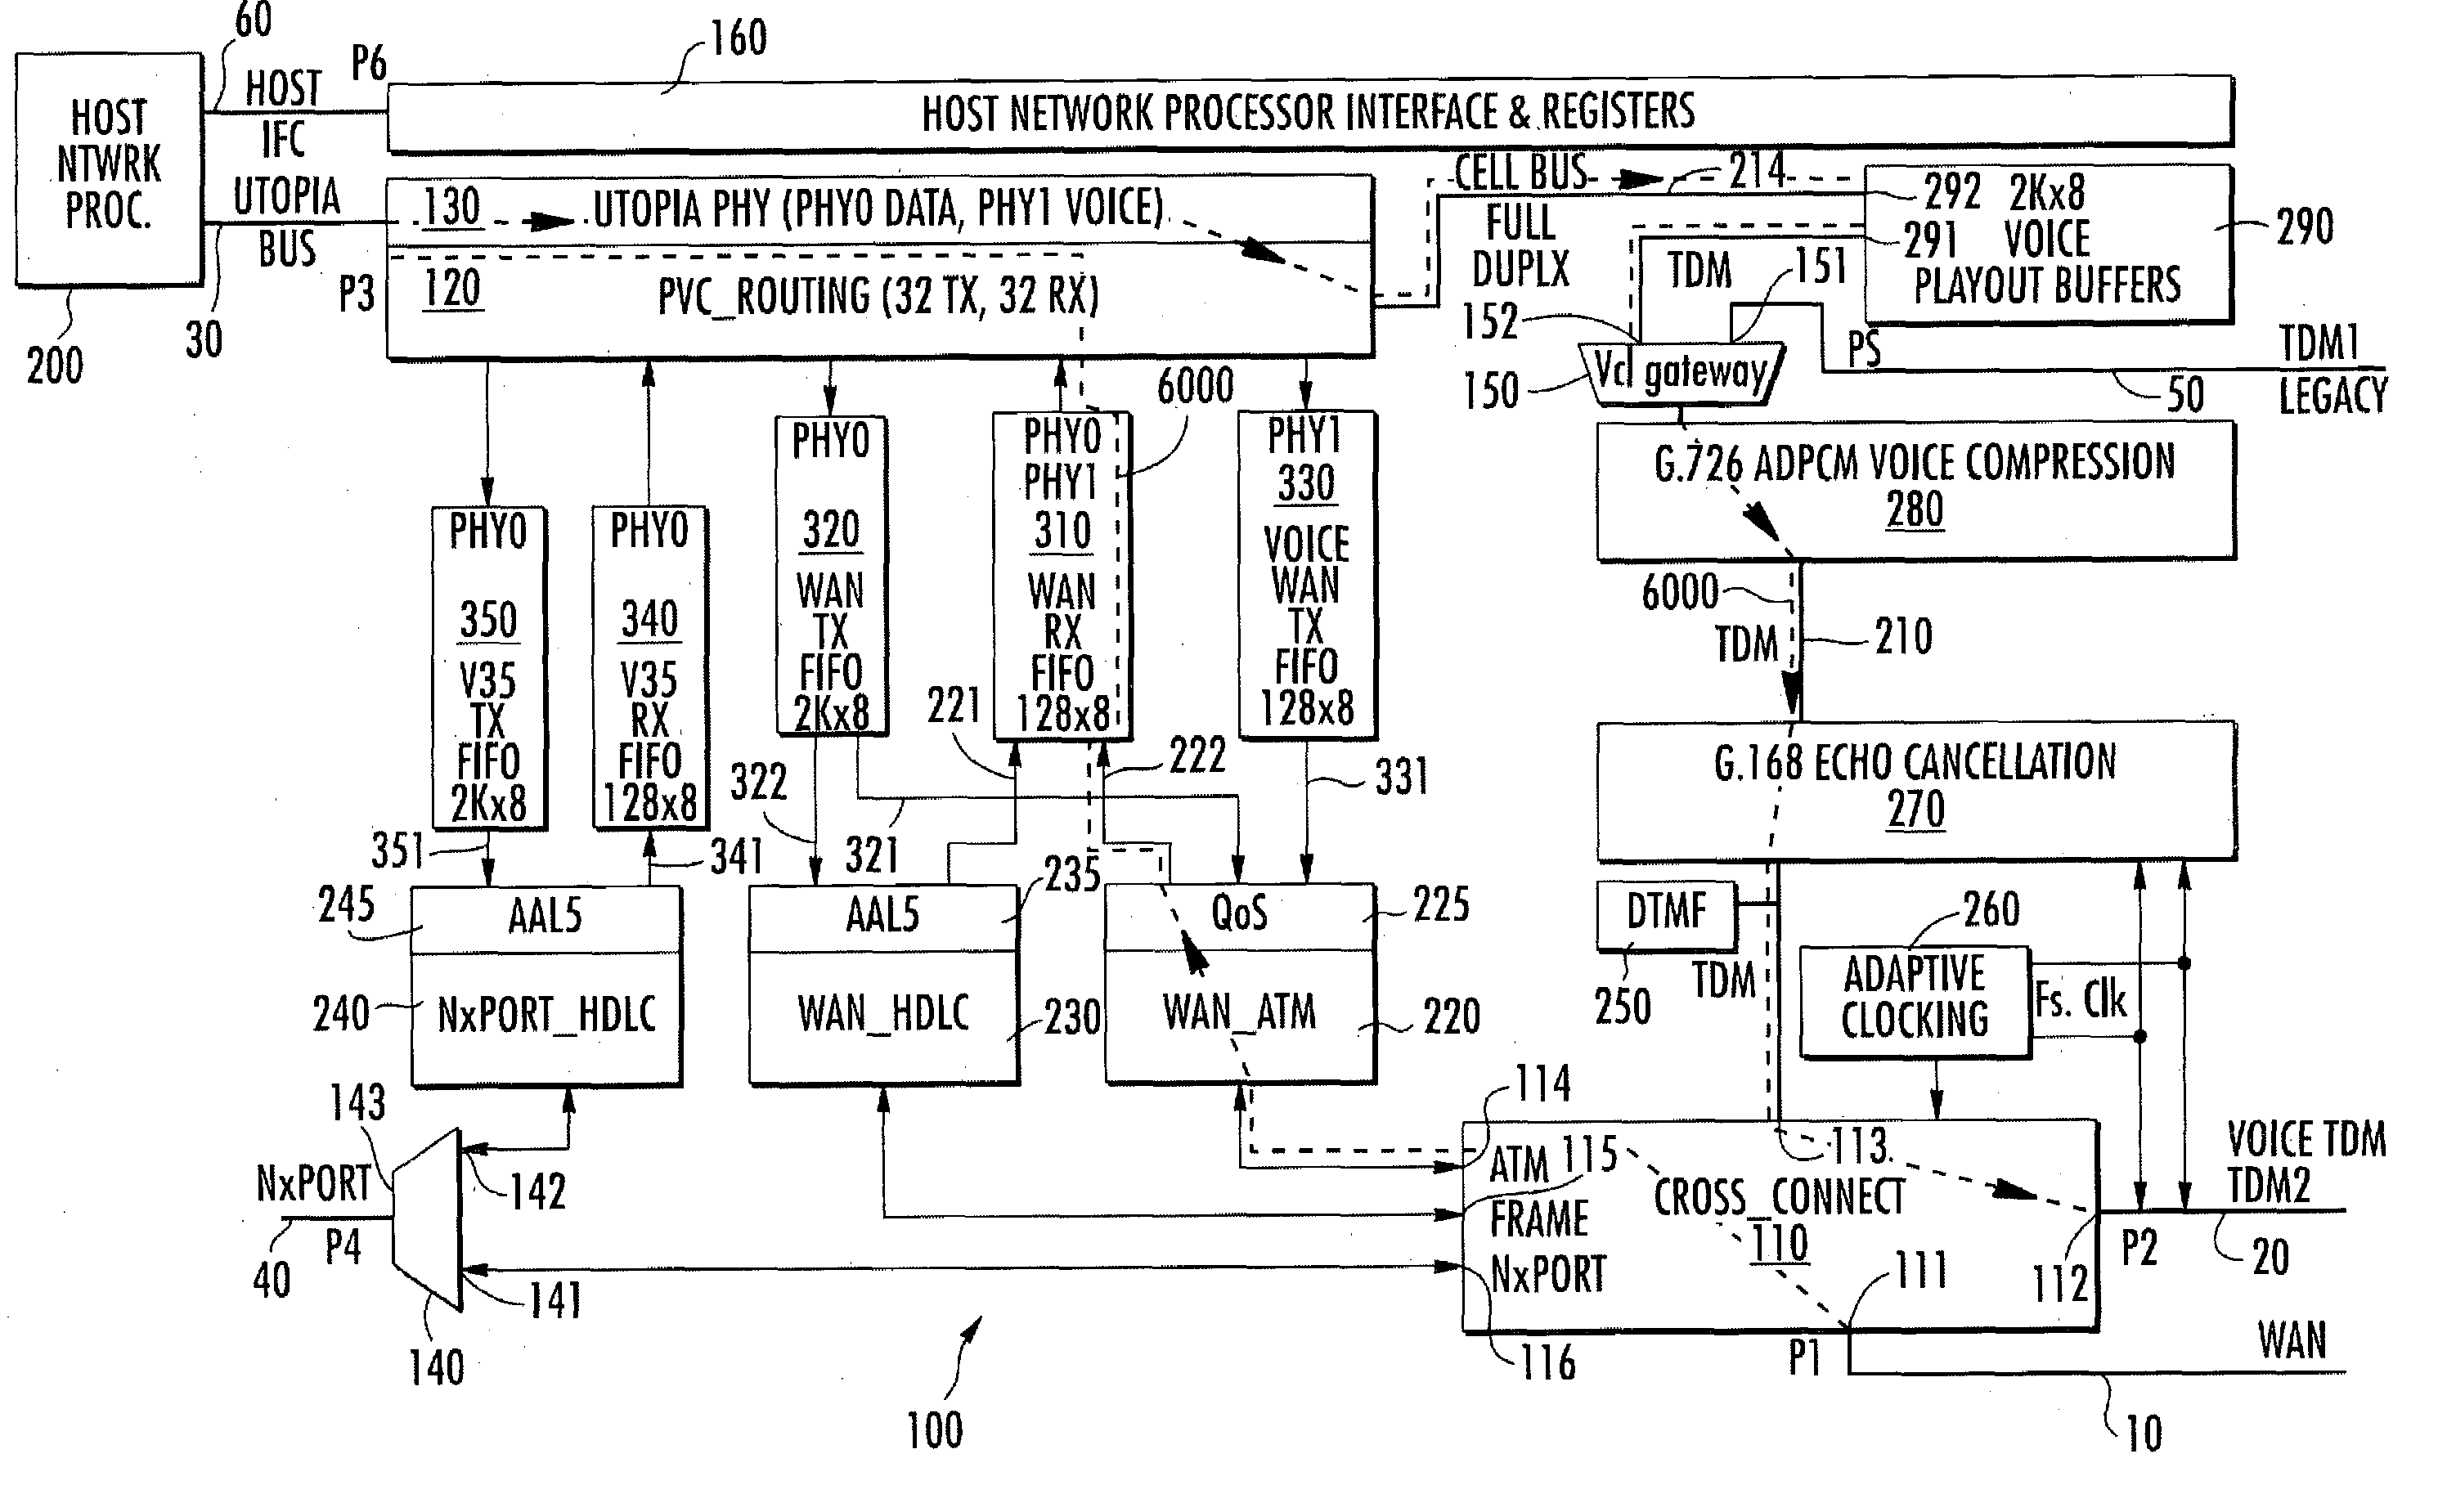 Dual-PHY based integrated access device